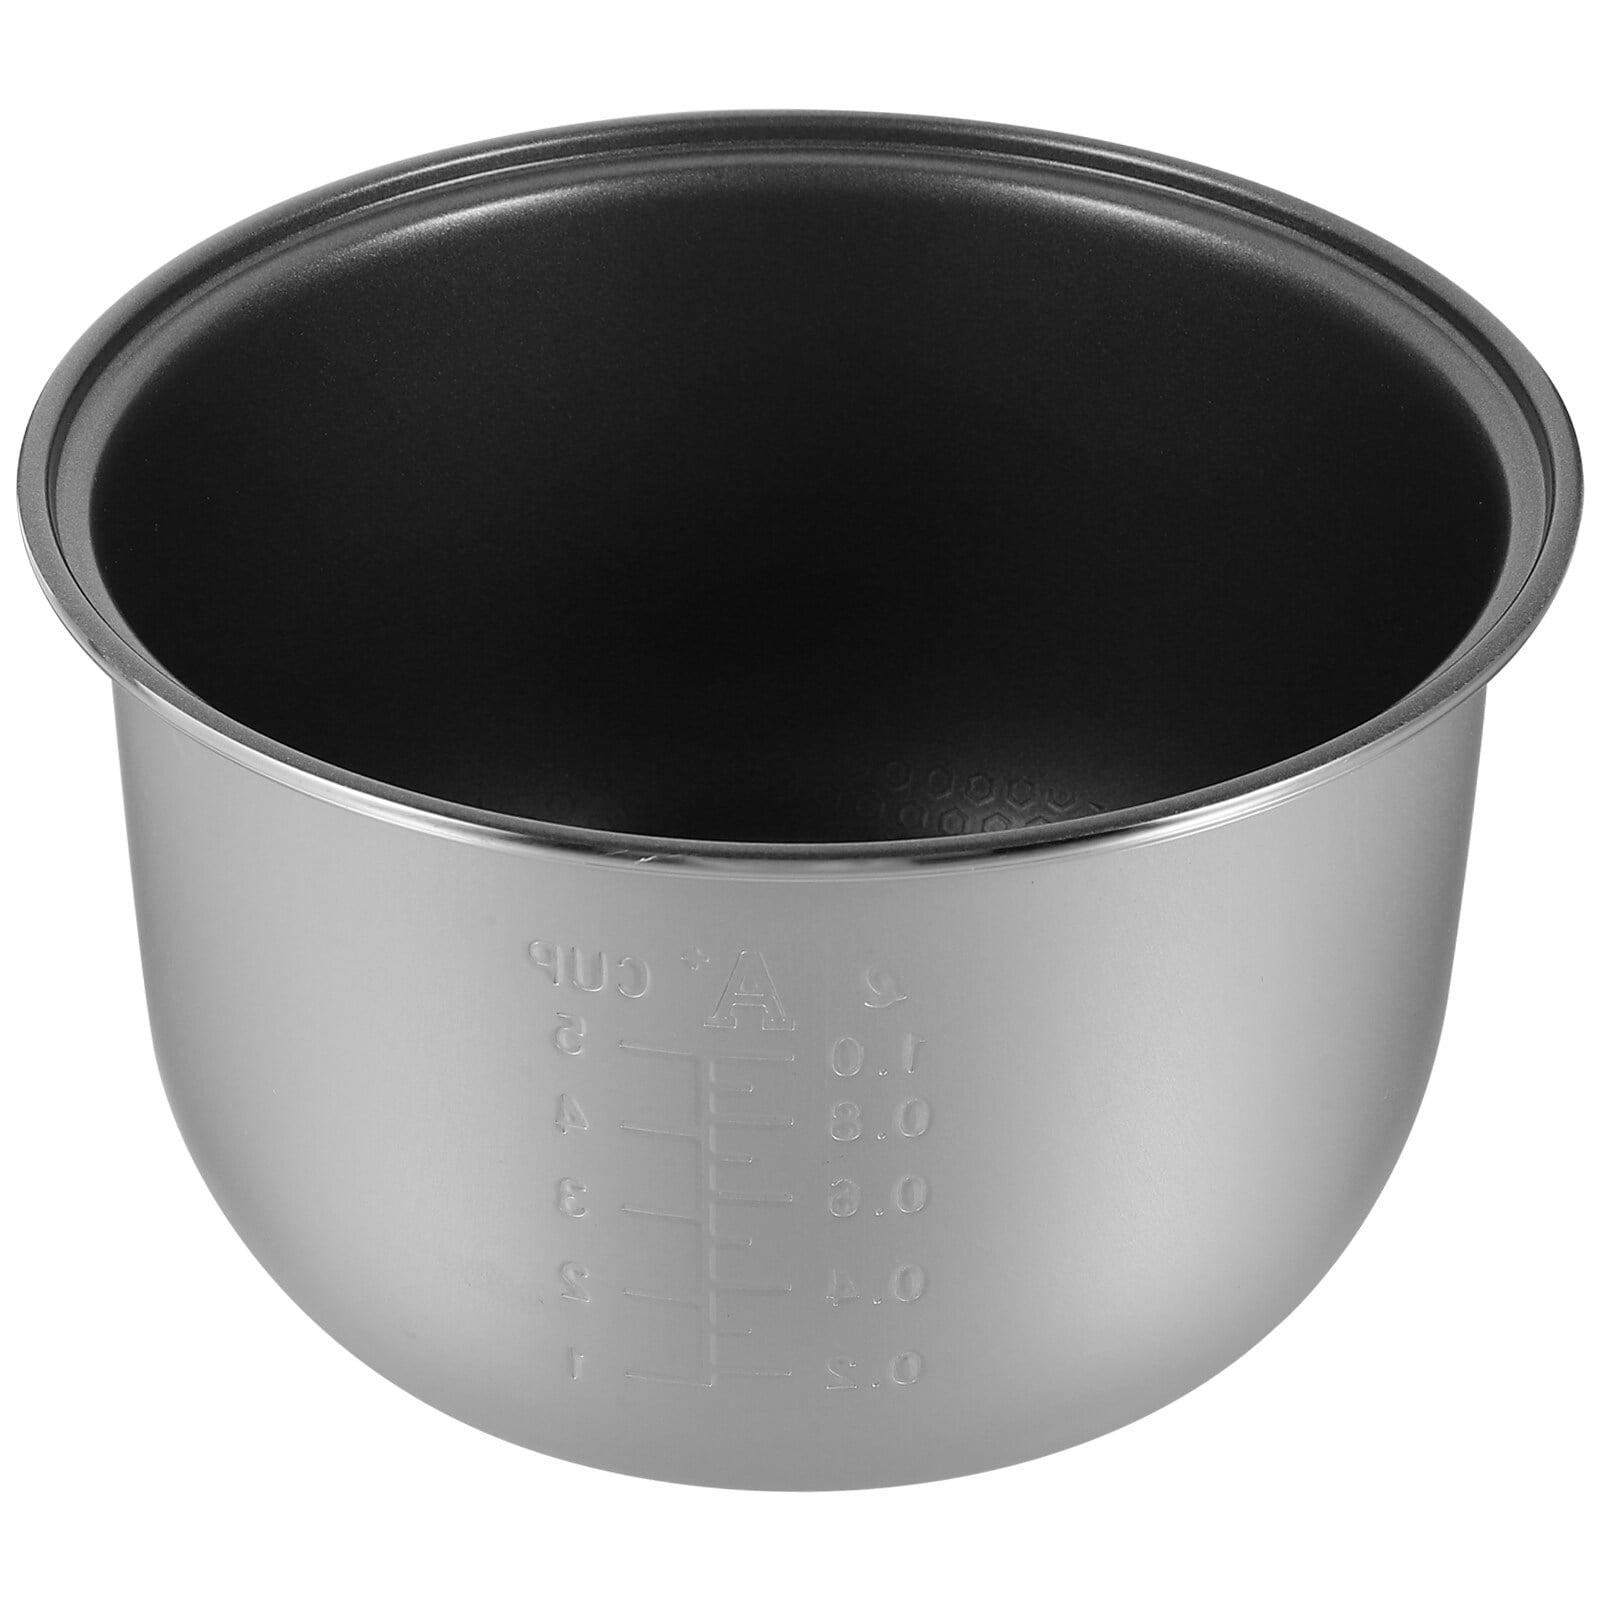 Thick Cooking Pot Multi-function Inner Pot Cooking Pot Liner Rice Cooker Supply for Cooking, Size: 23.5X23.5X10CM